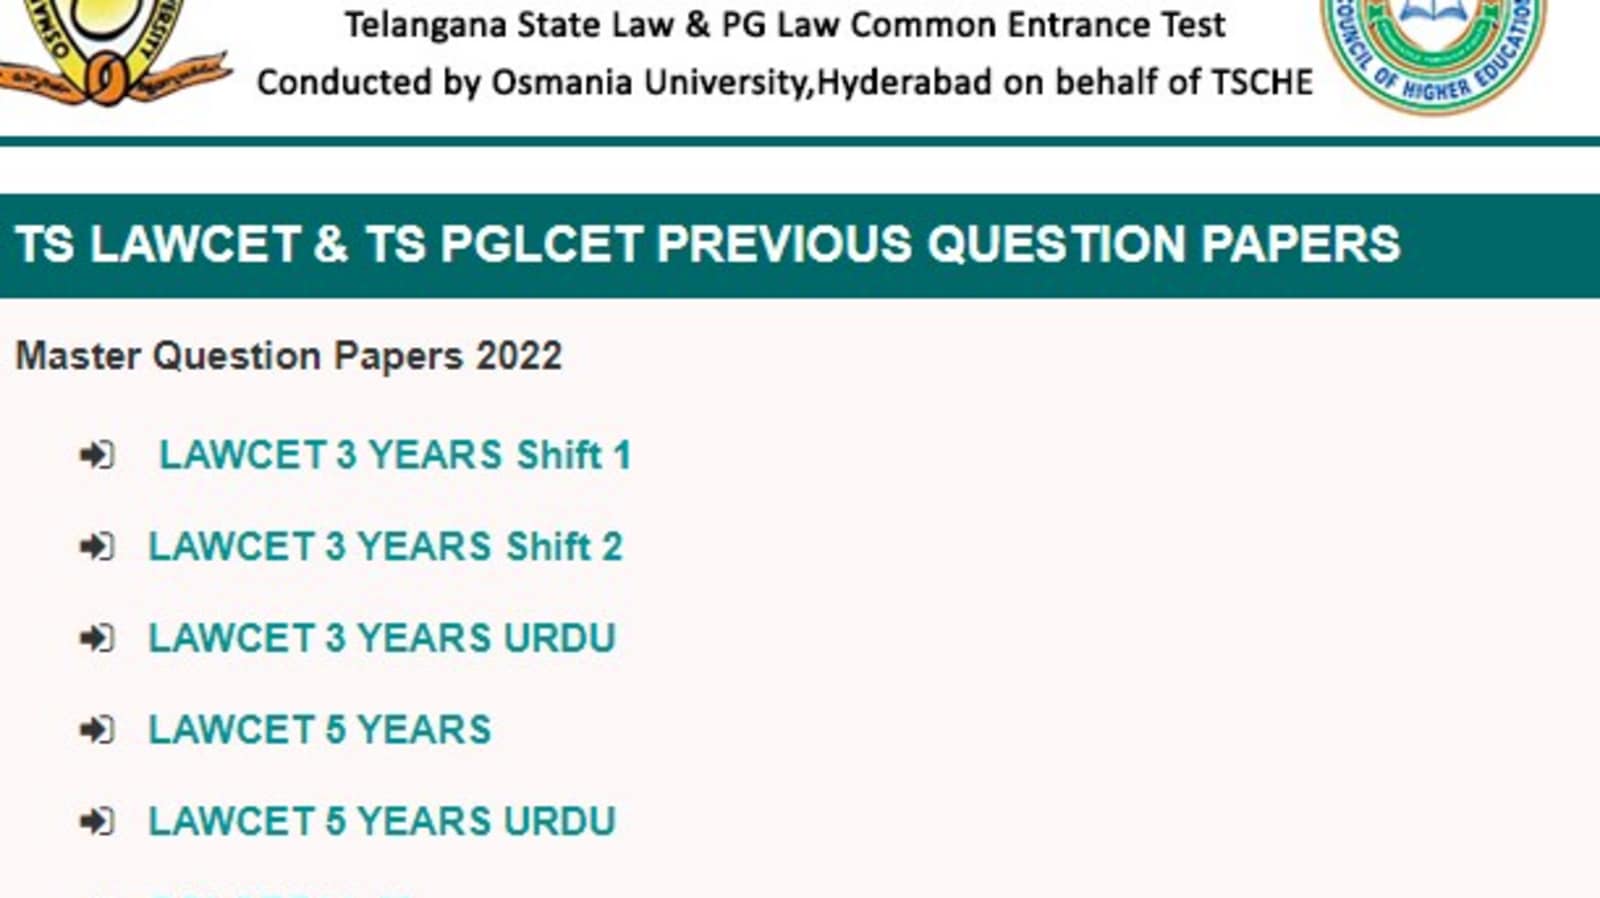 TS LAWCET answer key released, here's how to check & raise objections